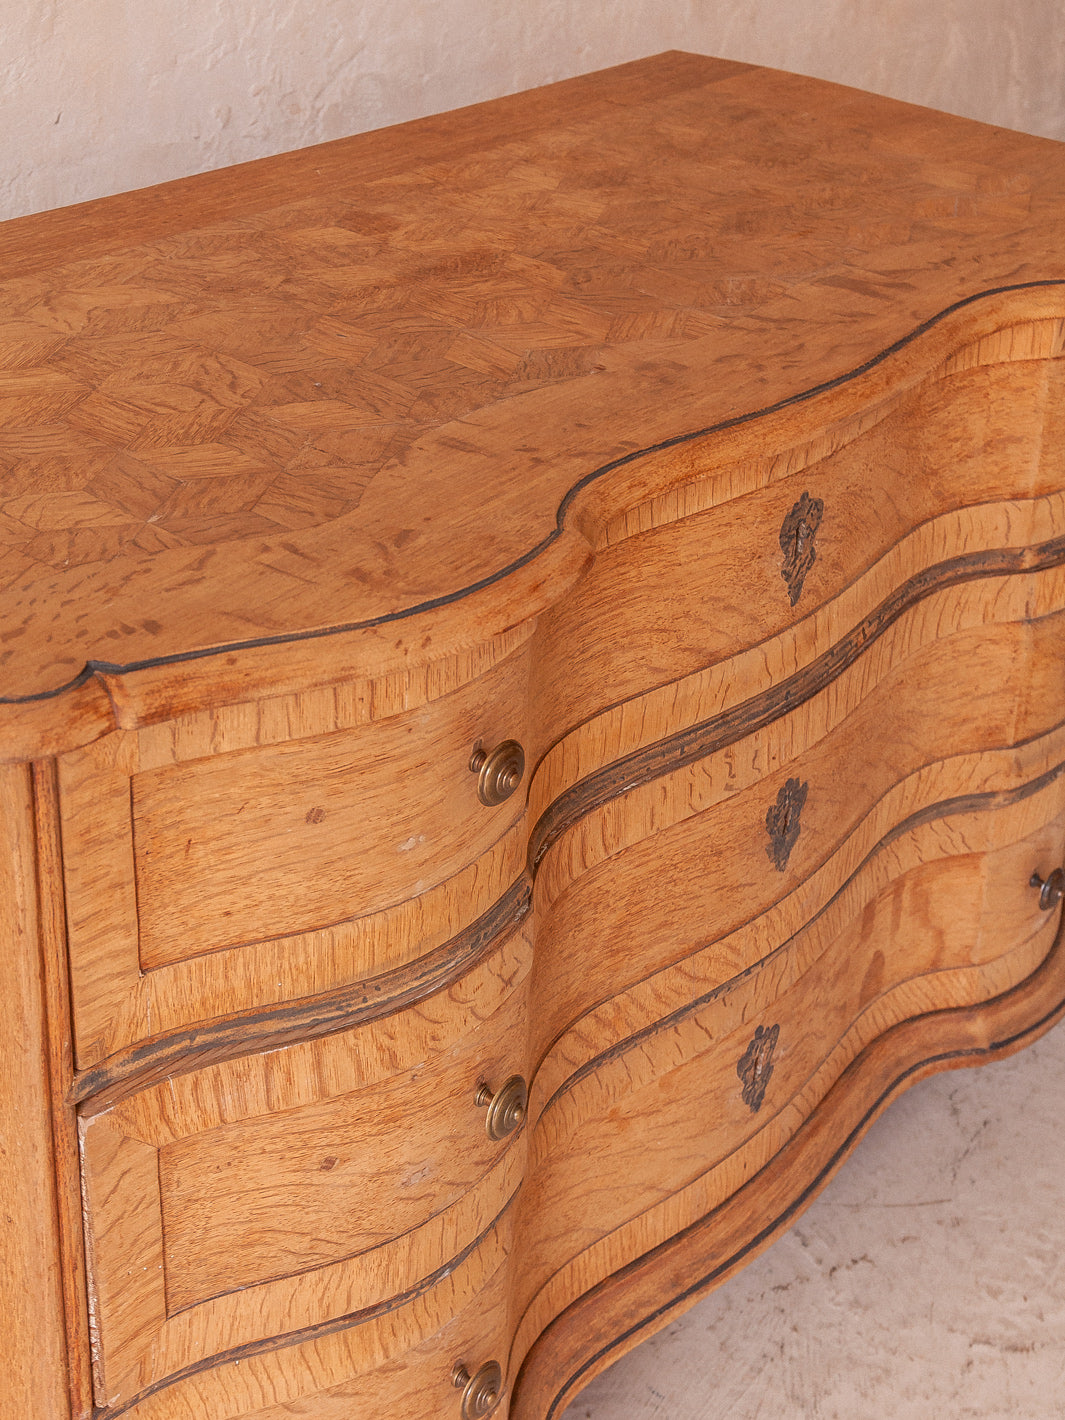 Chest of drawers Germany circa 1770, solid oak